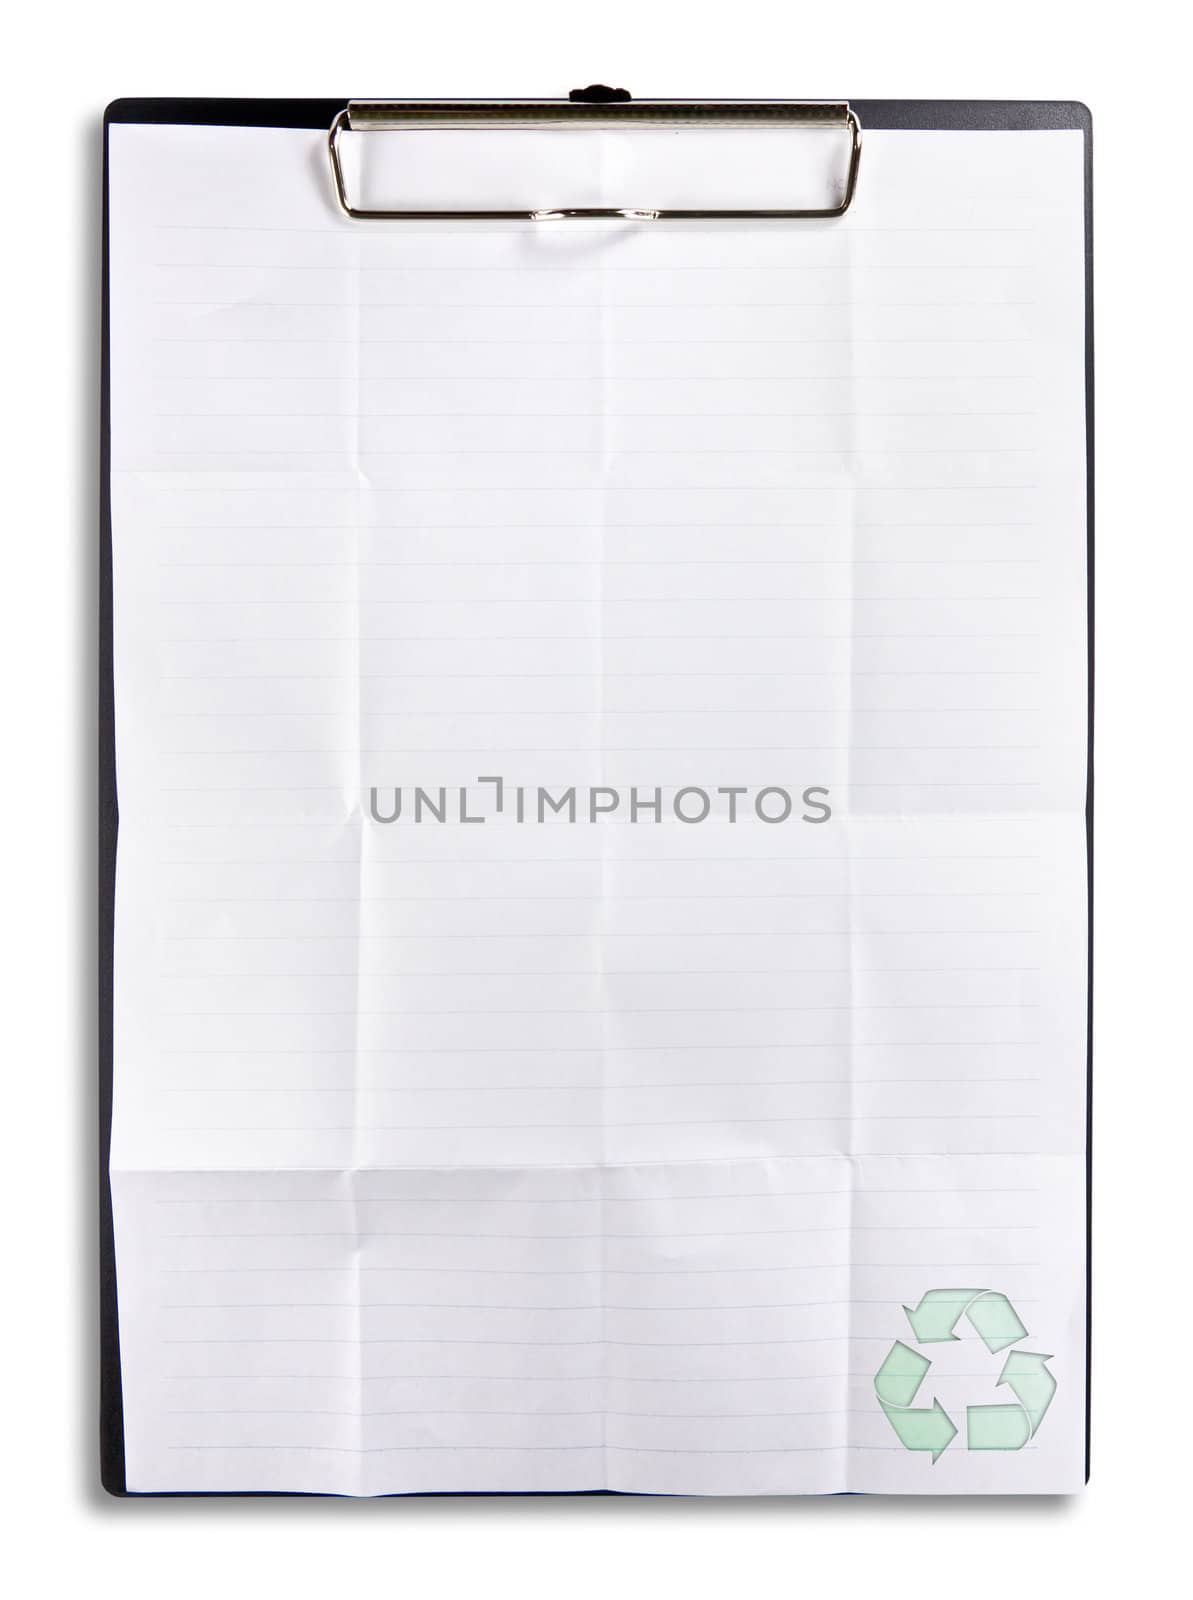 recycle paper on clip board isolated on white